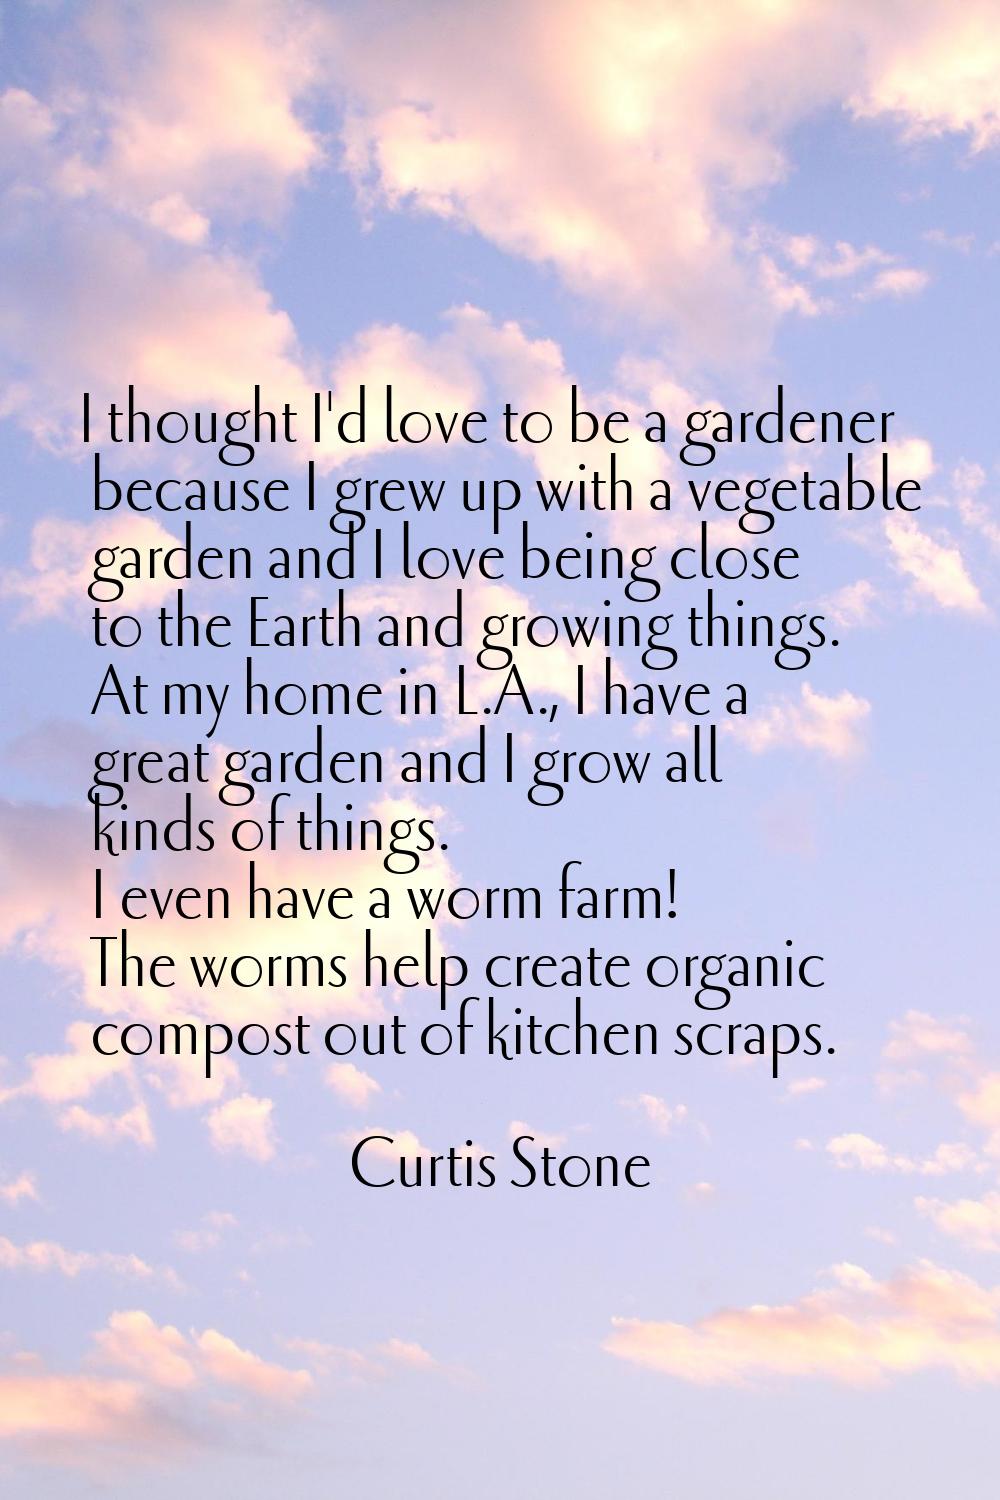 I thought I'd love to be a gardener because I grew up with a vegetable garden and I love being clos